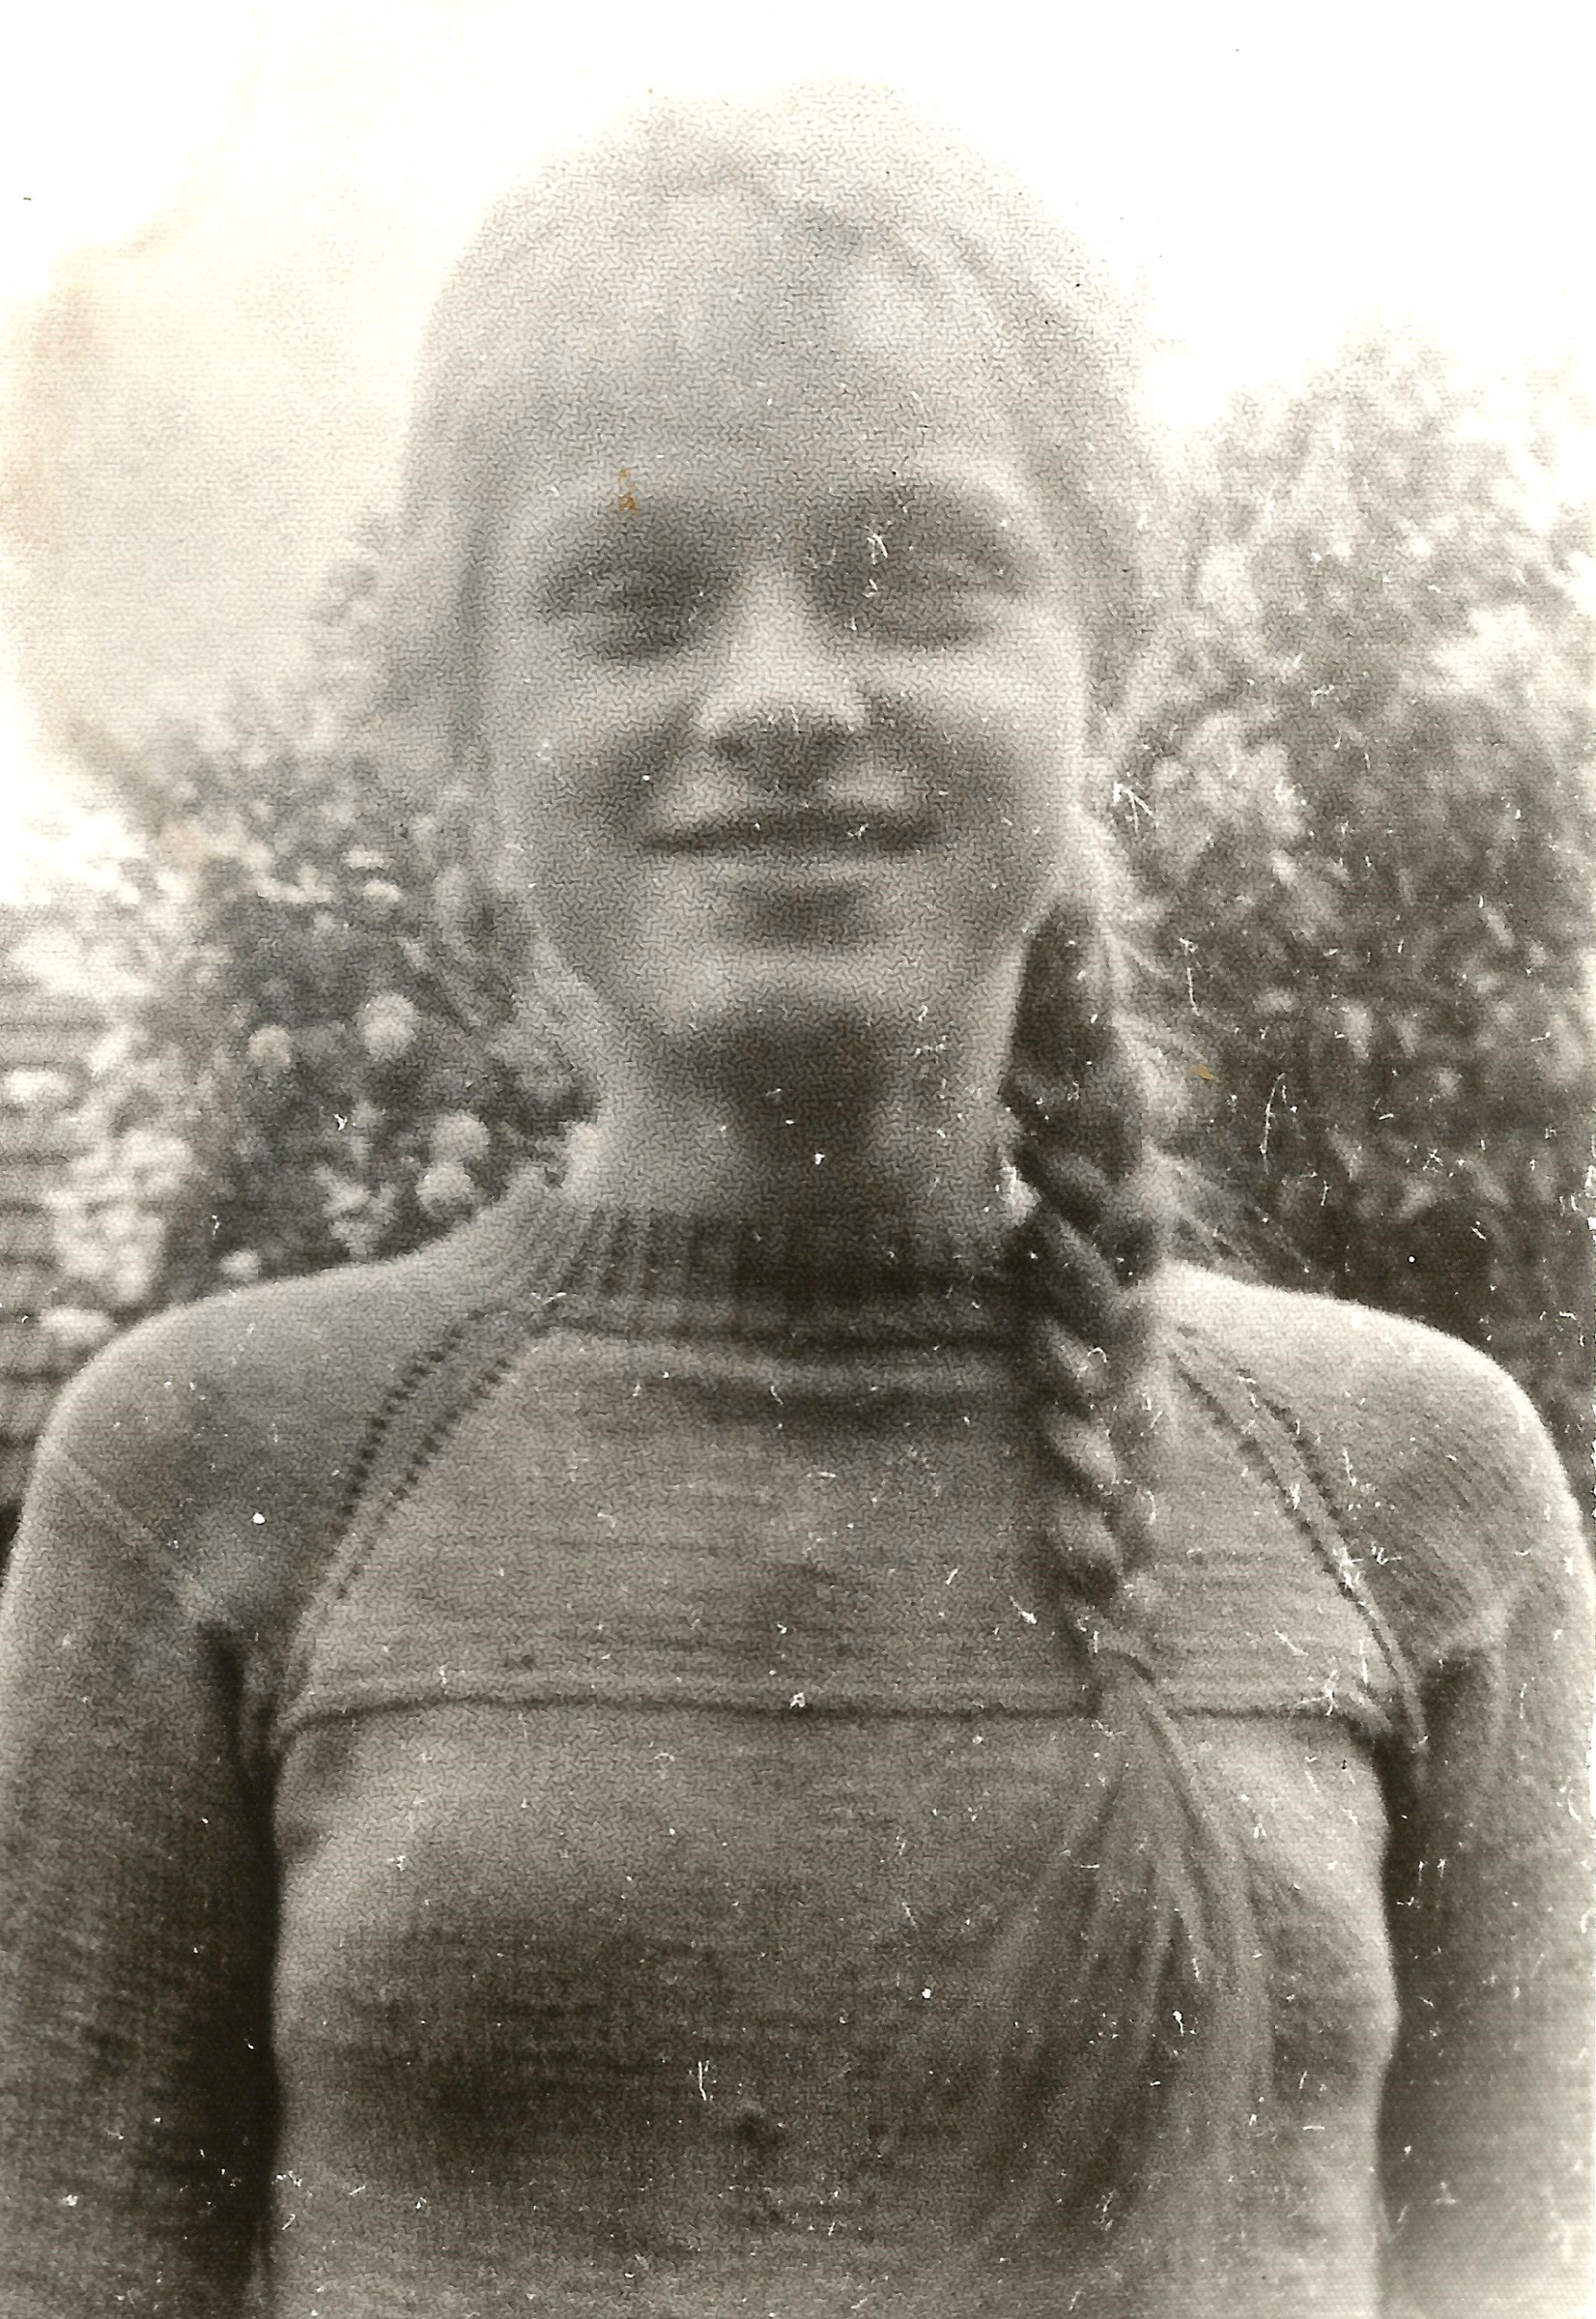 As a young girl